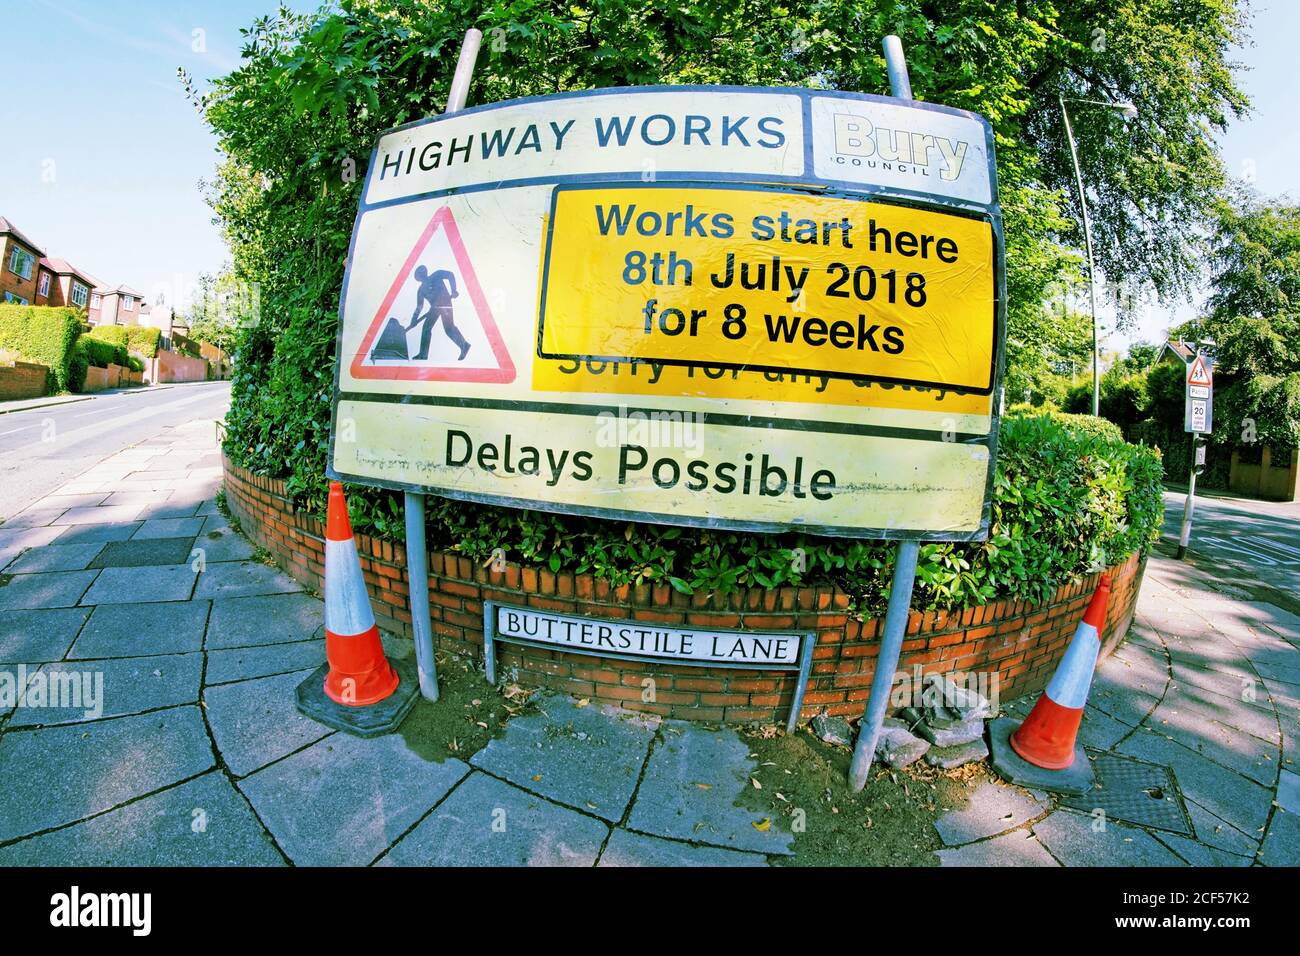 Highway Works, Delays Possible roadsign from Bury Council. Situated in Prestwich, Greater Manchester, UK. Possible traffic disruption Stock Photo